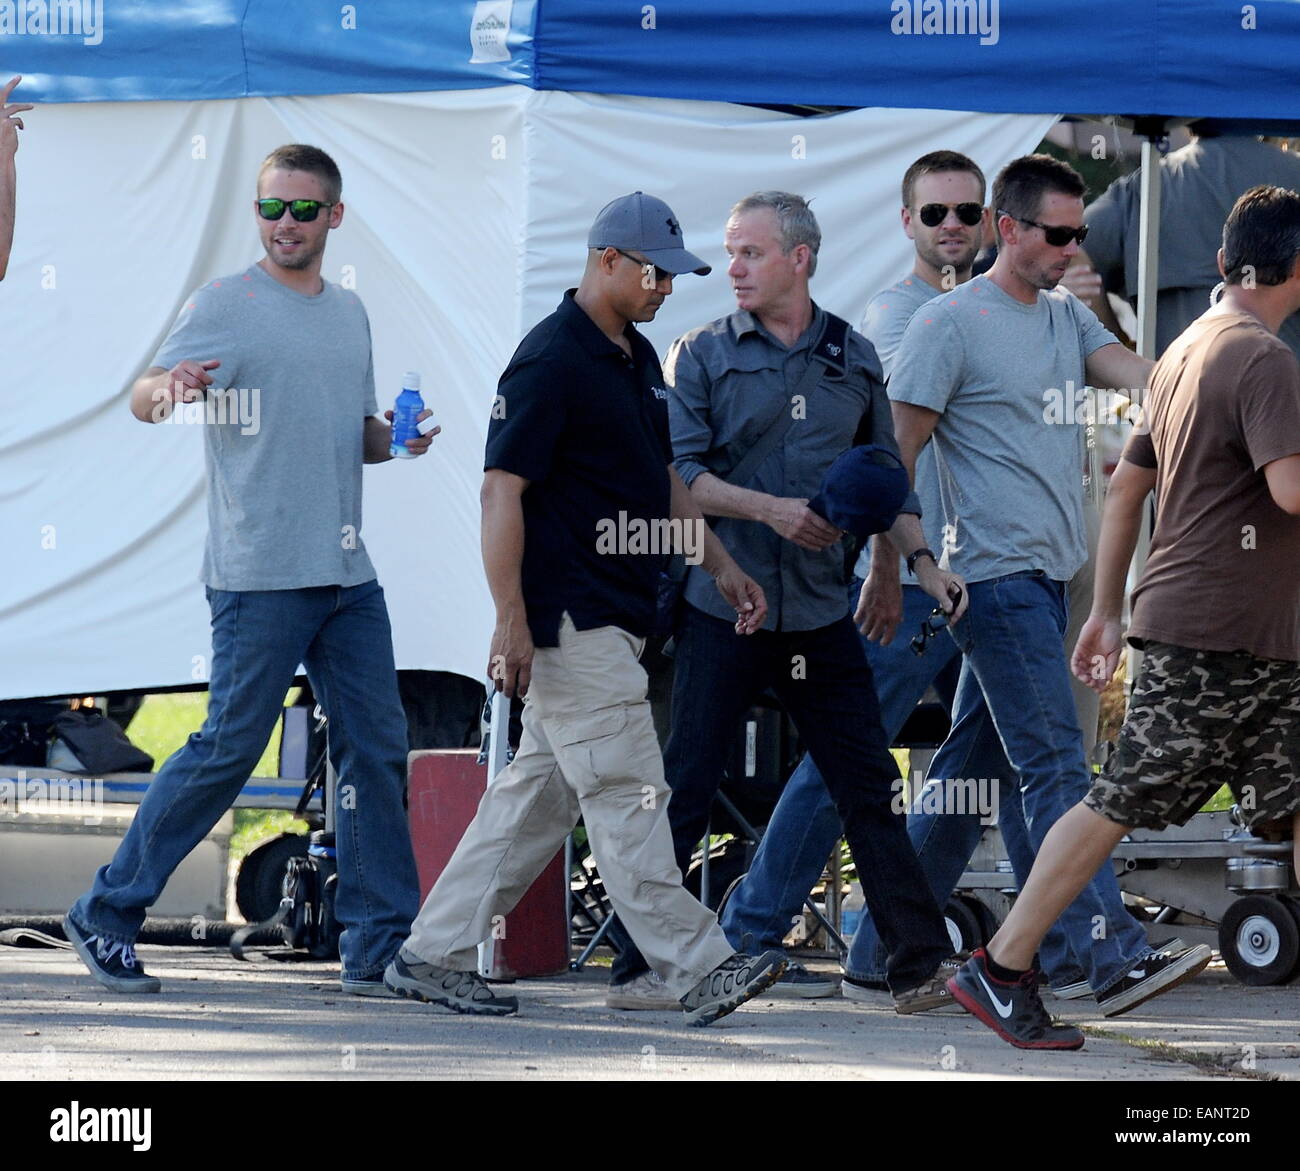 Jordana Brewster was spotted on the set of 'Fast and the Furious 7' with Cody and Caleb Walker. The Walker brothers are on set to help finish the last portion of the movie after their brother Paul Walker's death. To finish one scene, 3 body doubles for Pa Stock Photo